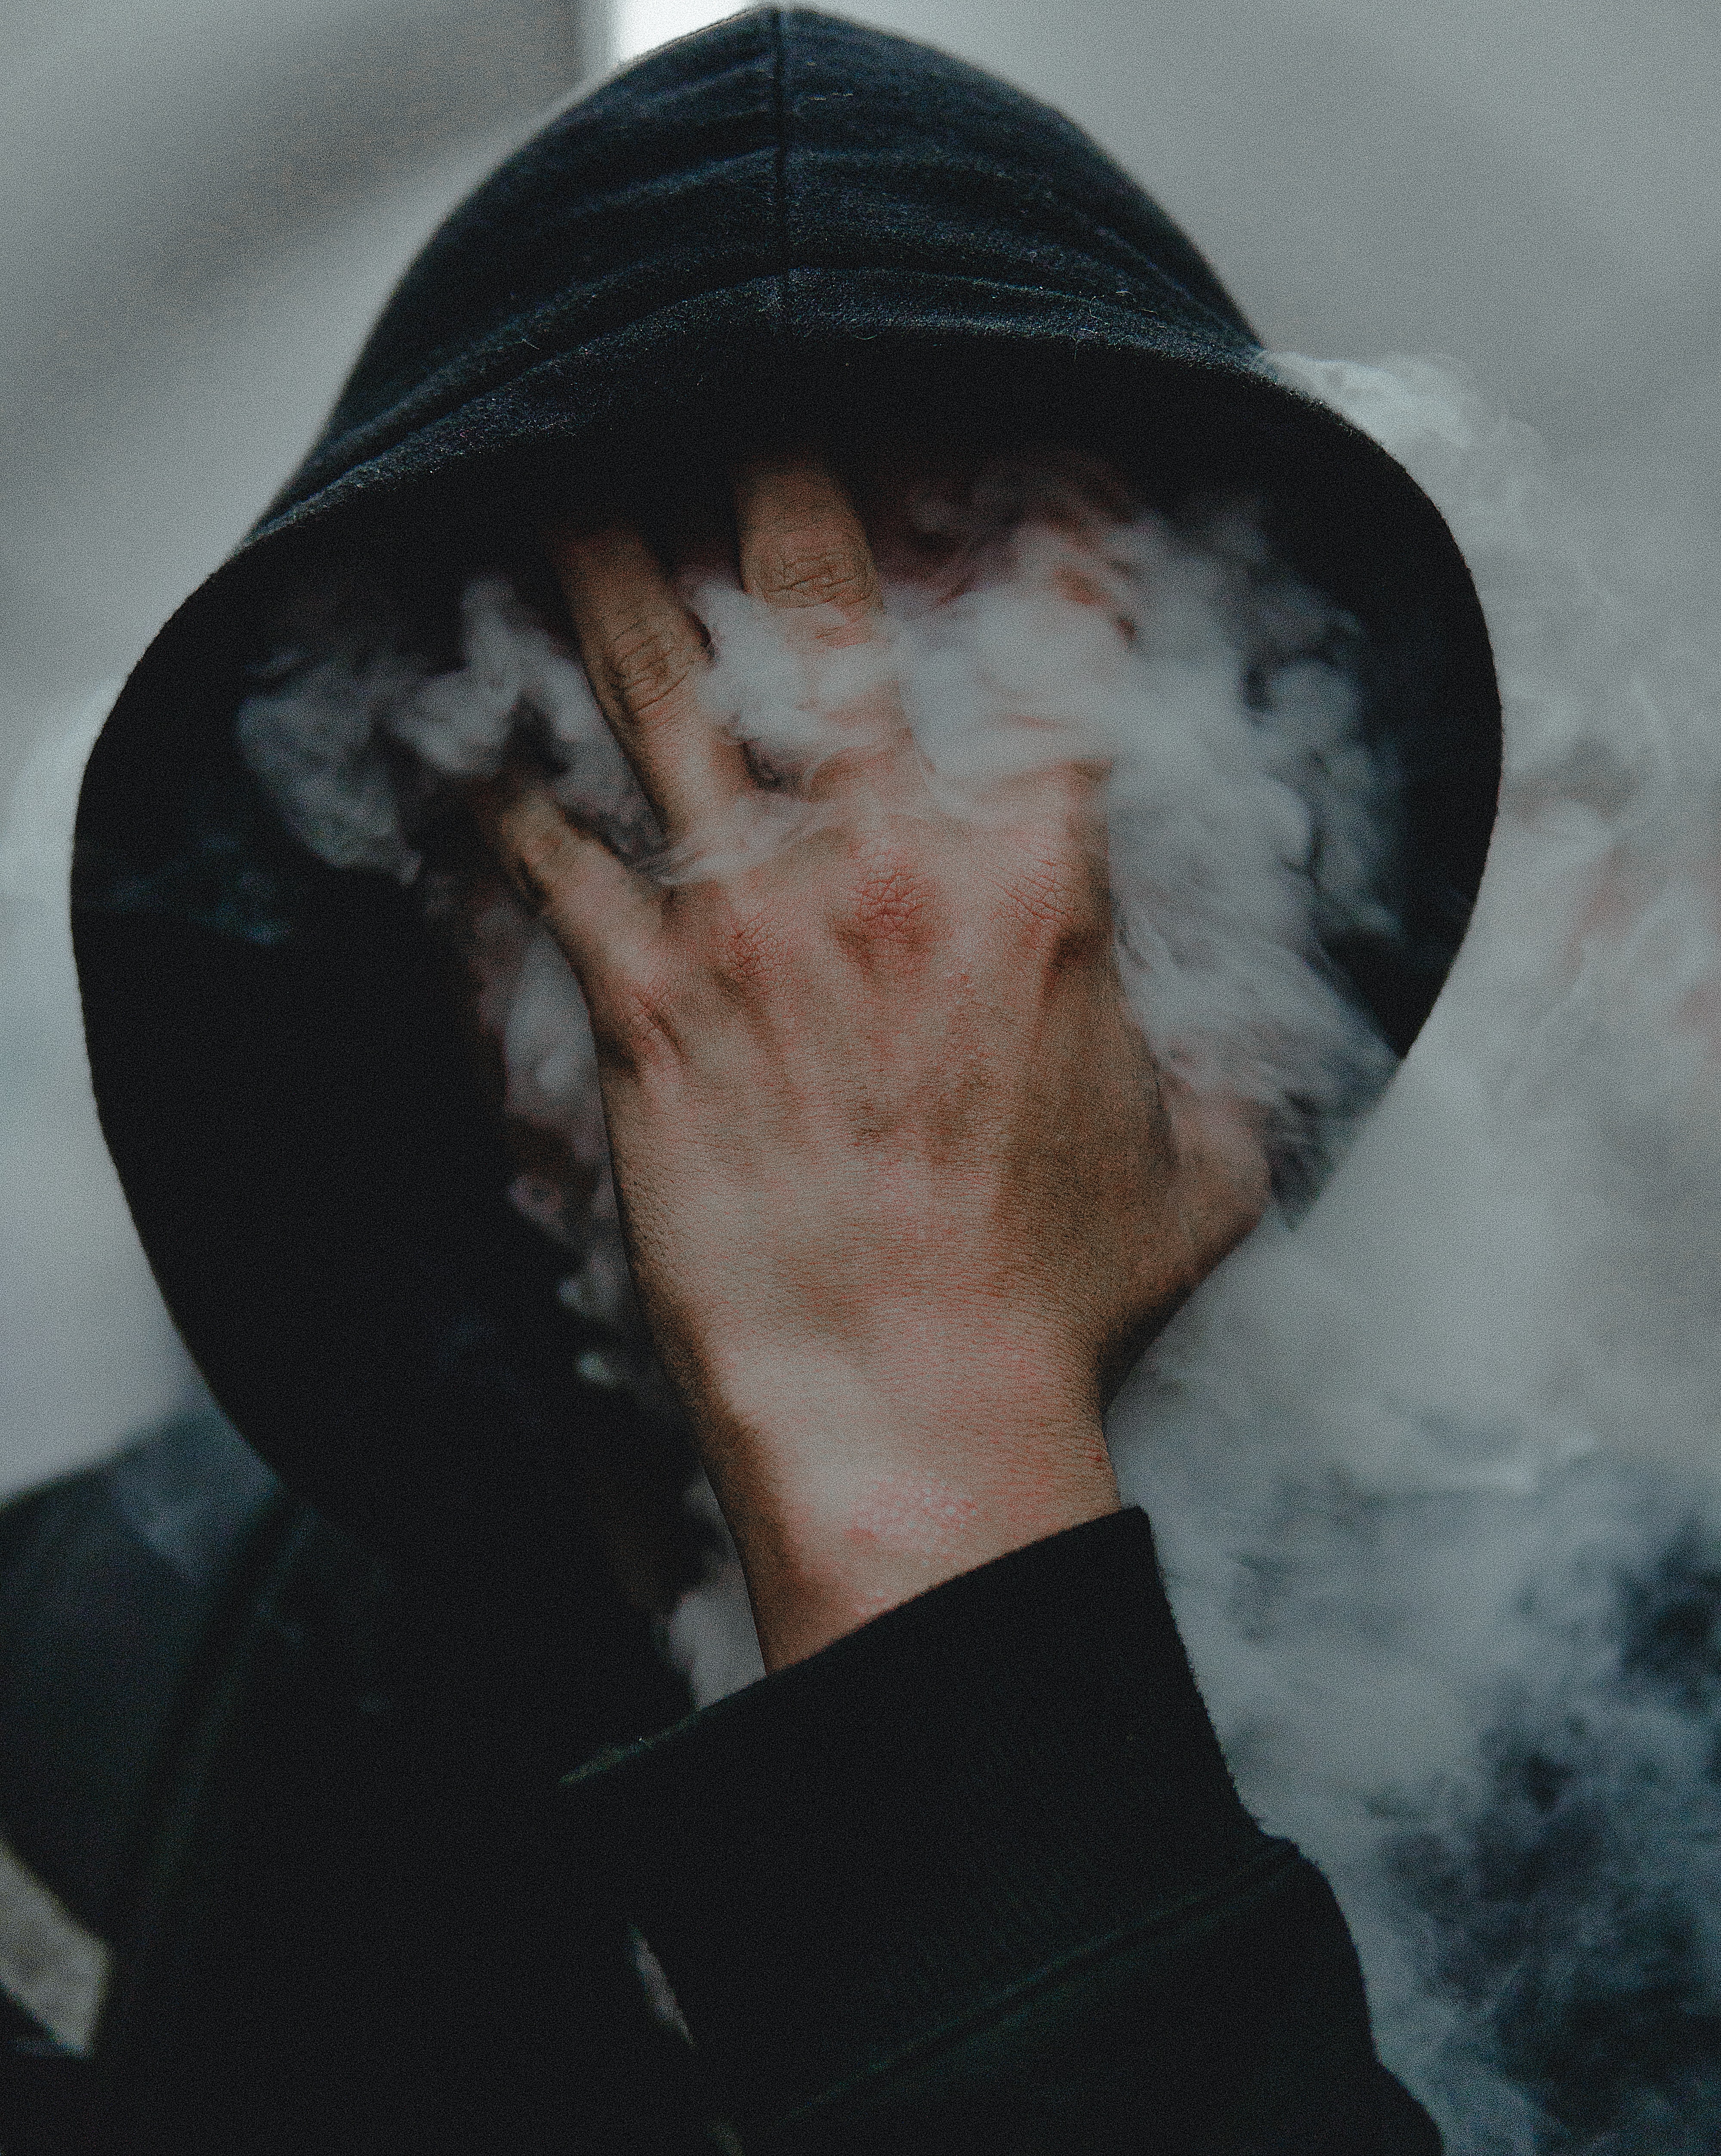 a hooded person hiding their face behind smoke